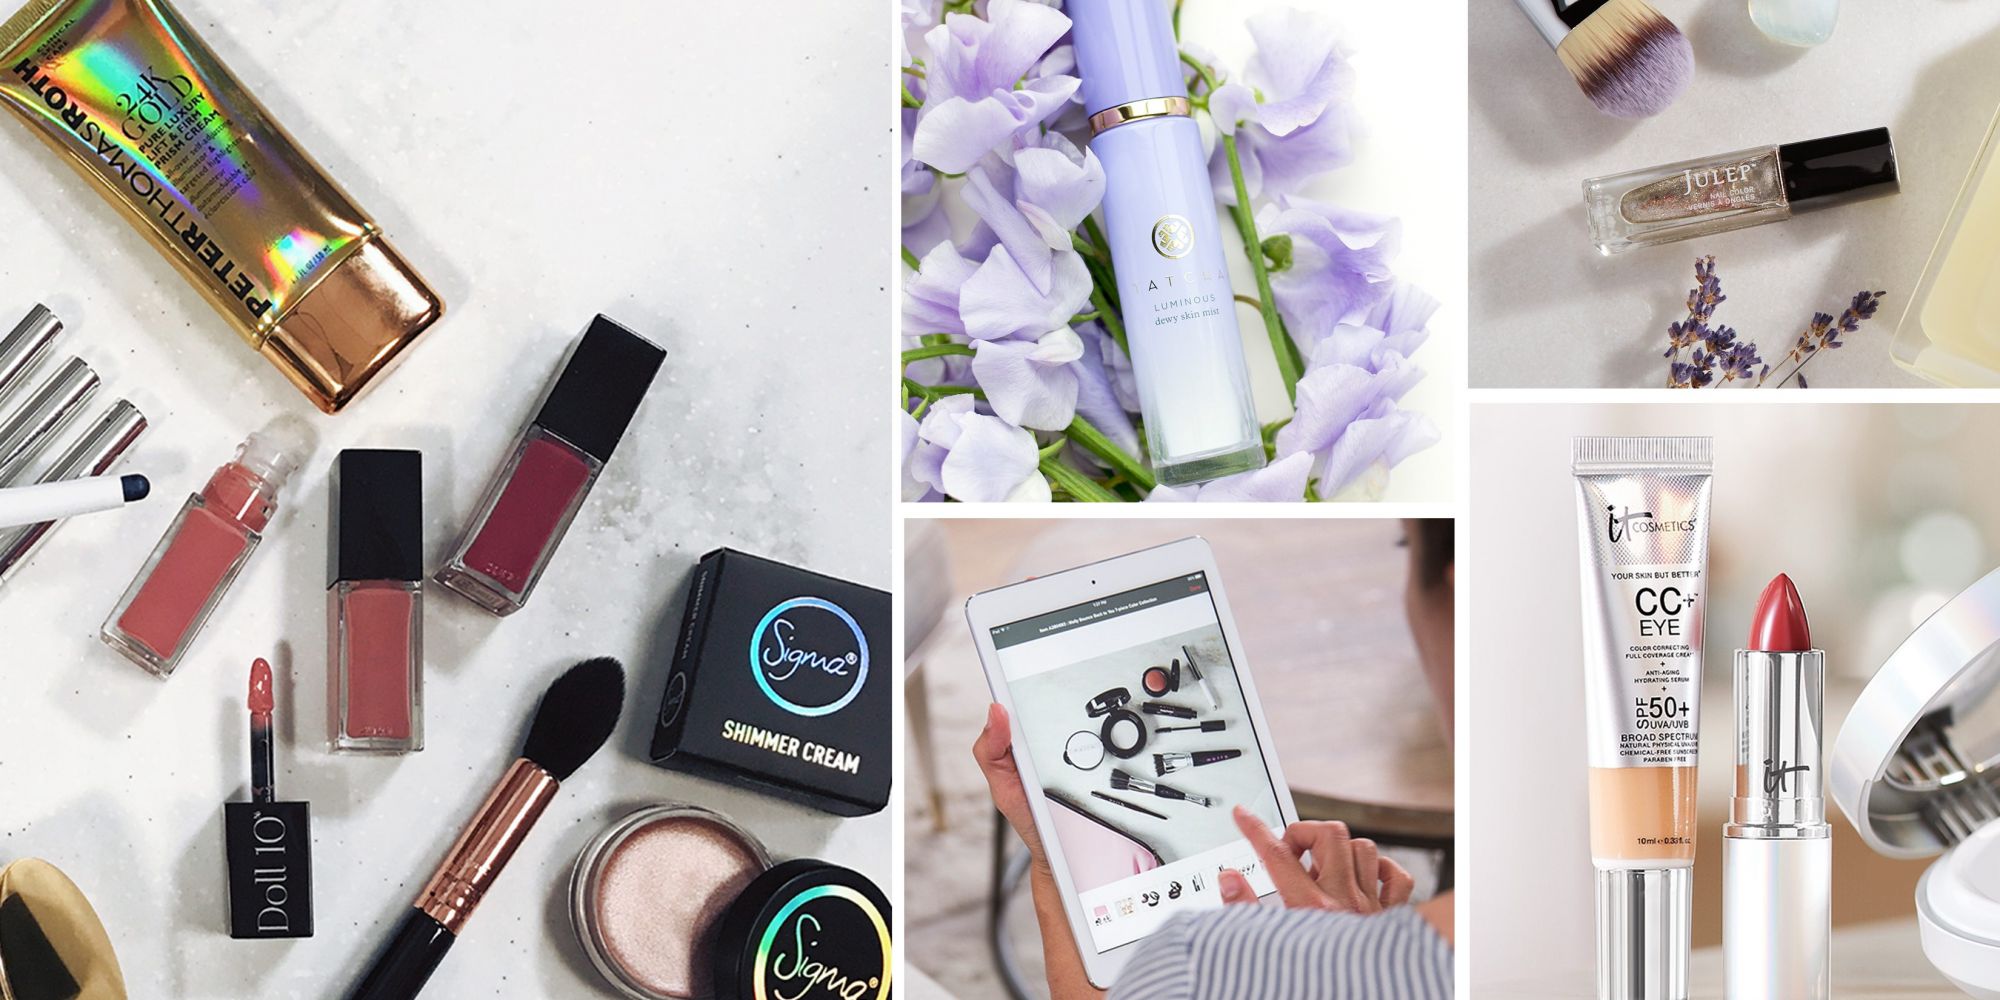 Not So Fast Amazon: Qurate Retail Group’s Rob Robillard Has Bold Ambitions To Make Beauty Bigger Than Ever At QVC, HSN and Zulily